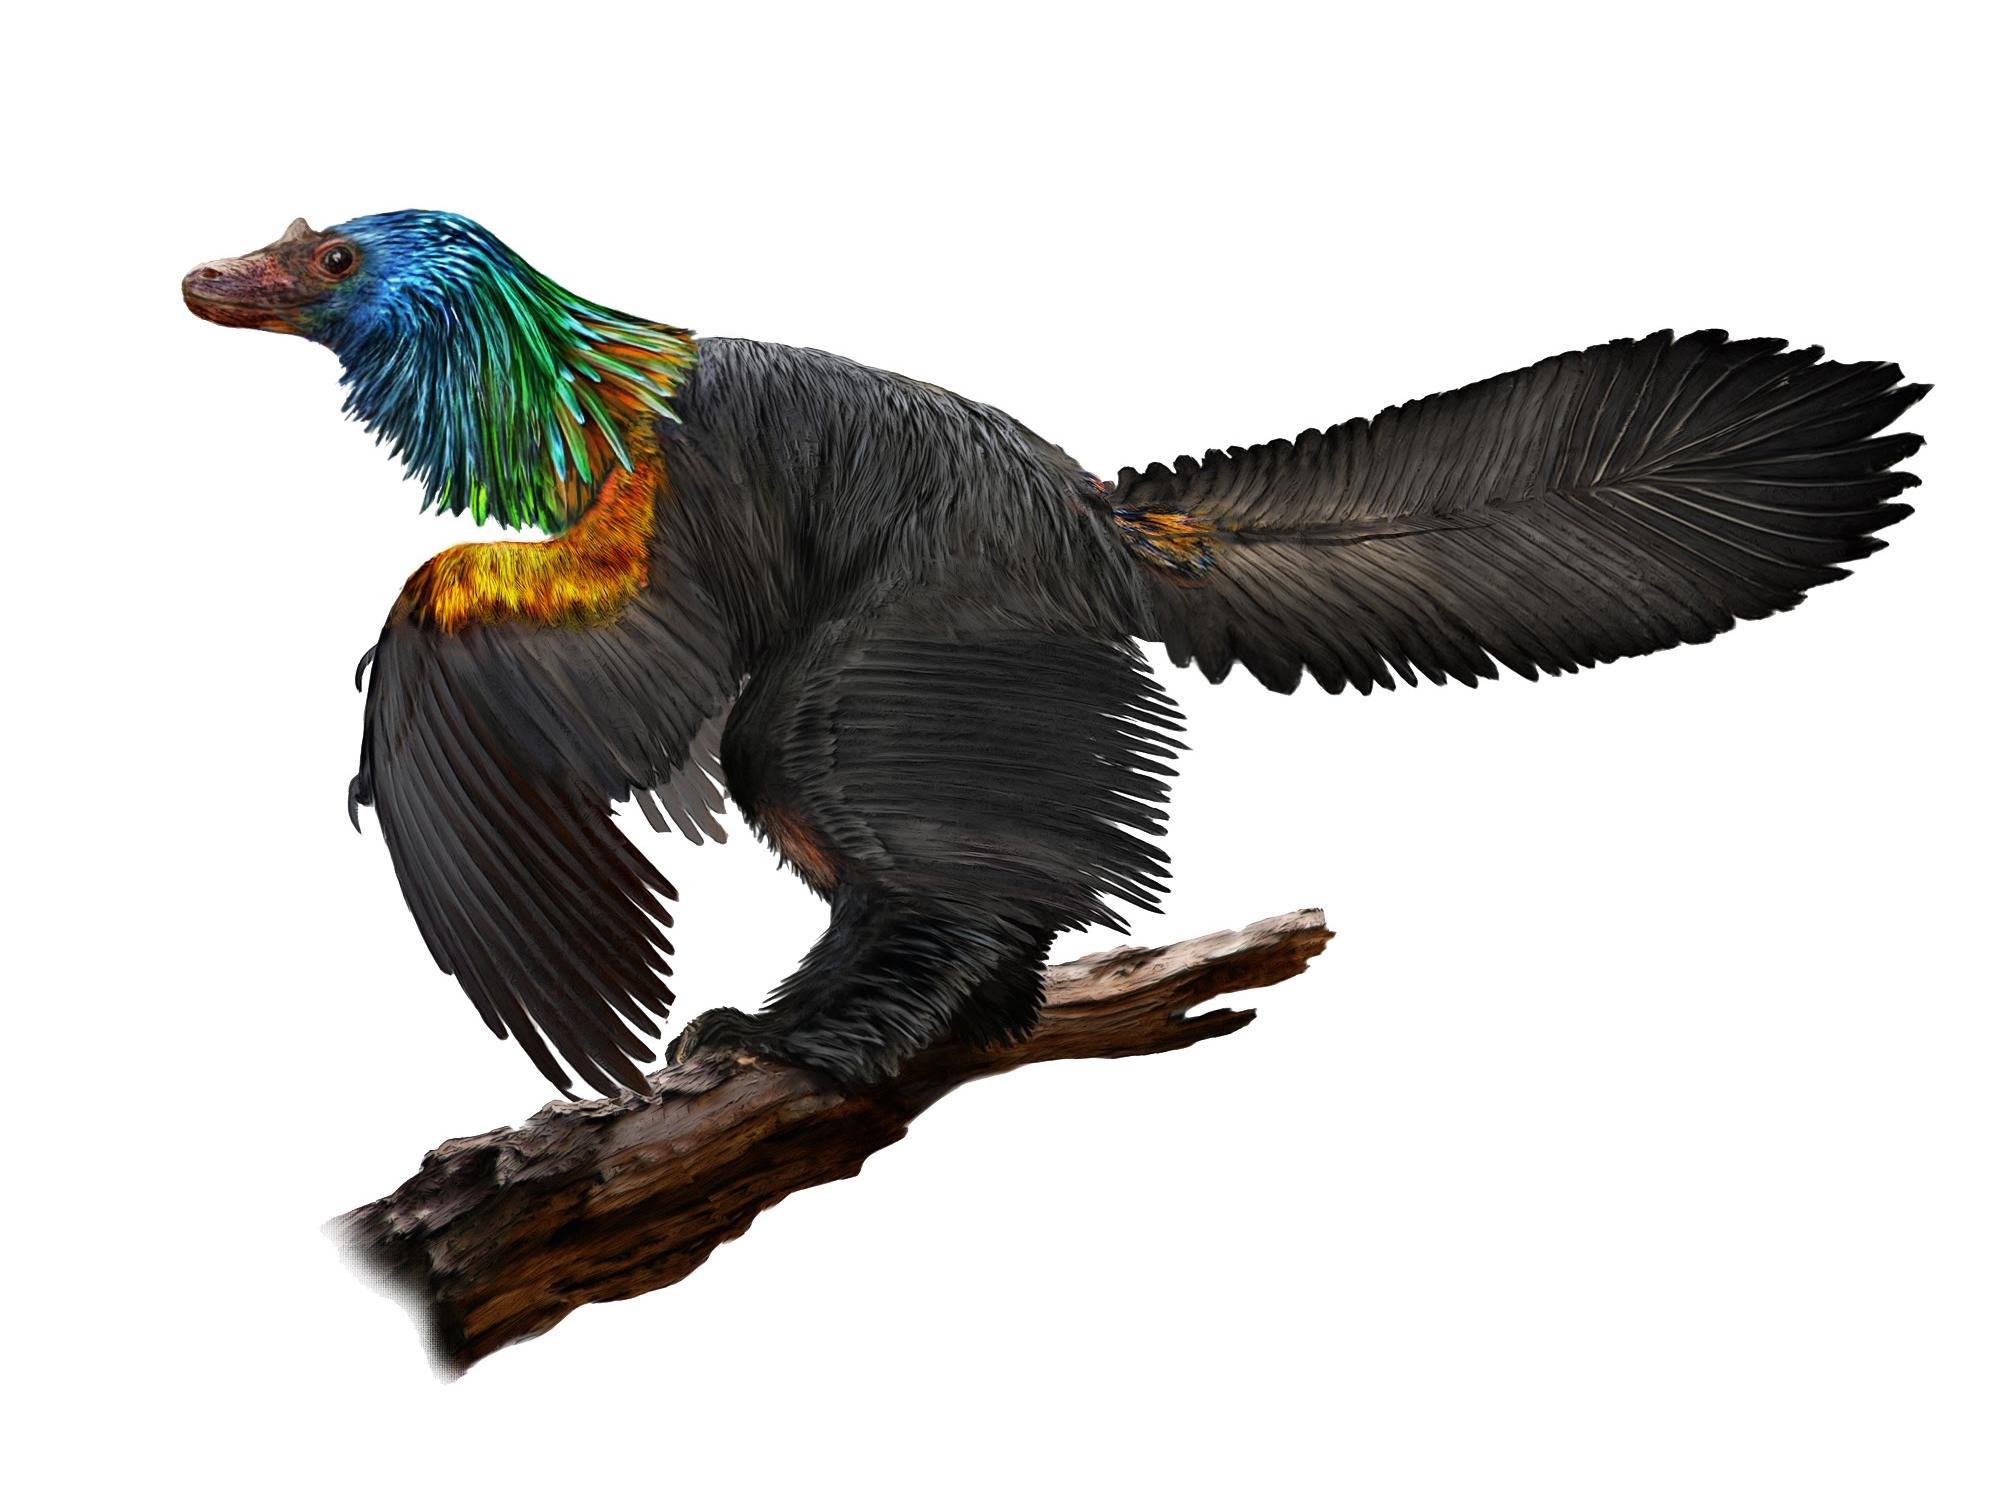 Illustration of the dinosaur Caihong juji, showing the iridescent plumage growing on its head and chest